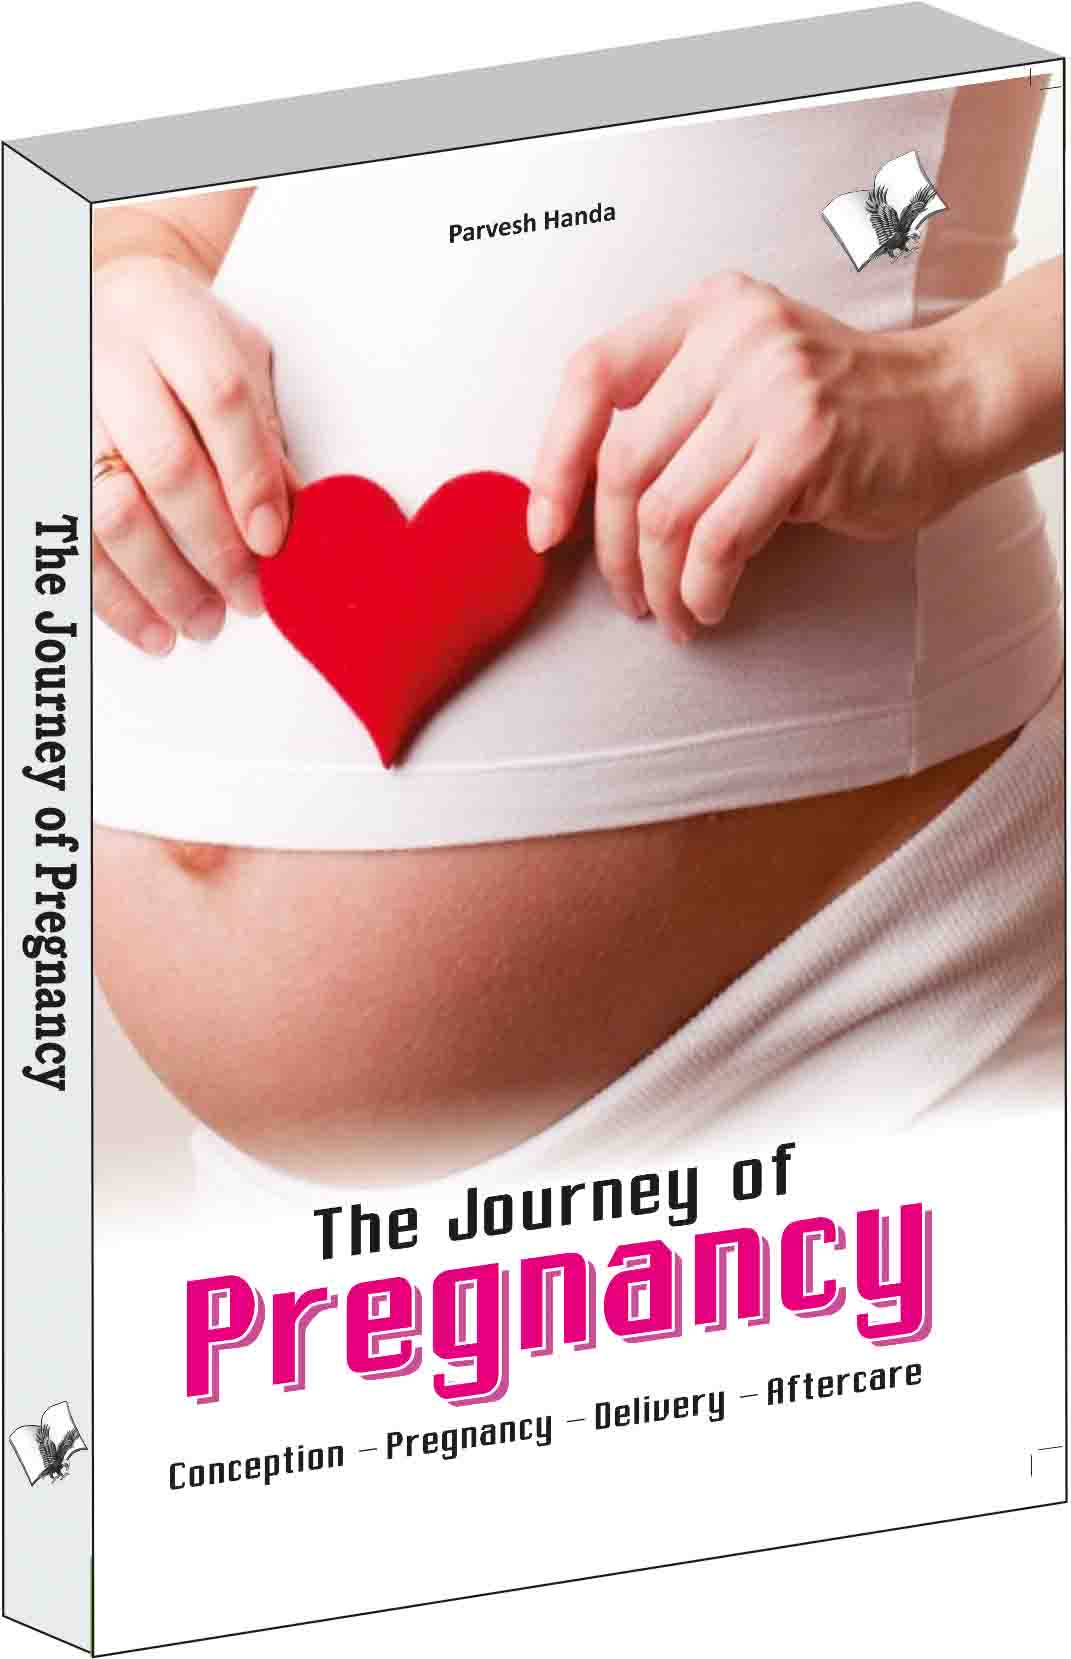 The Journey of Pregnancy -Conception – Pregnancy – Delivery – Aftercare